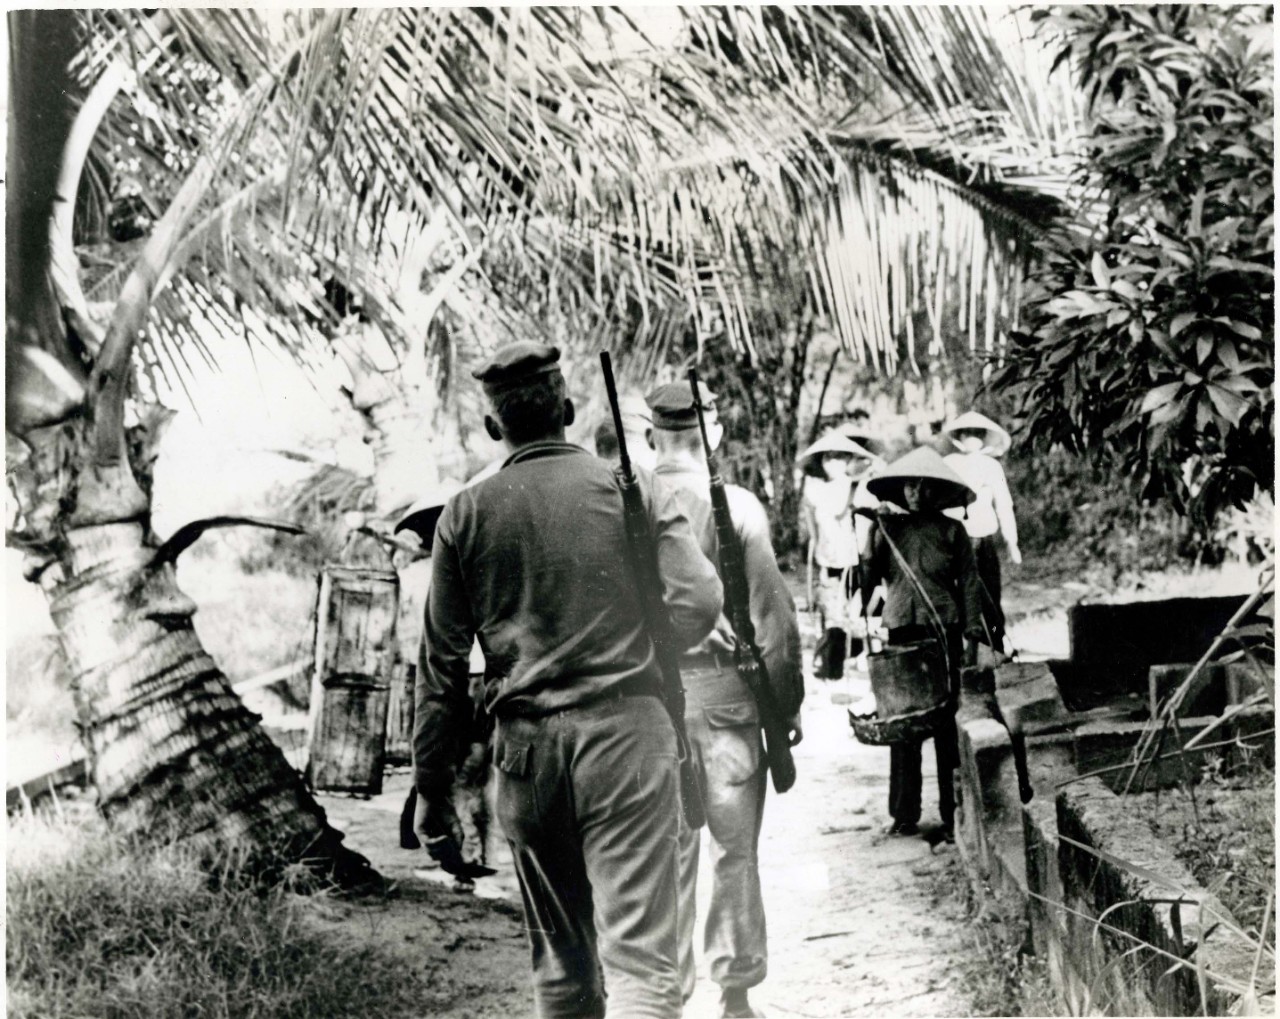 Seabee's from Naval Mobile Construction Battalion (NMCB) 11's Provisional Platoon greeting villages on patrol in the village of My Thi, Vietnam.